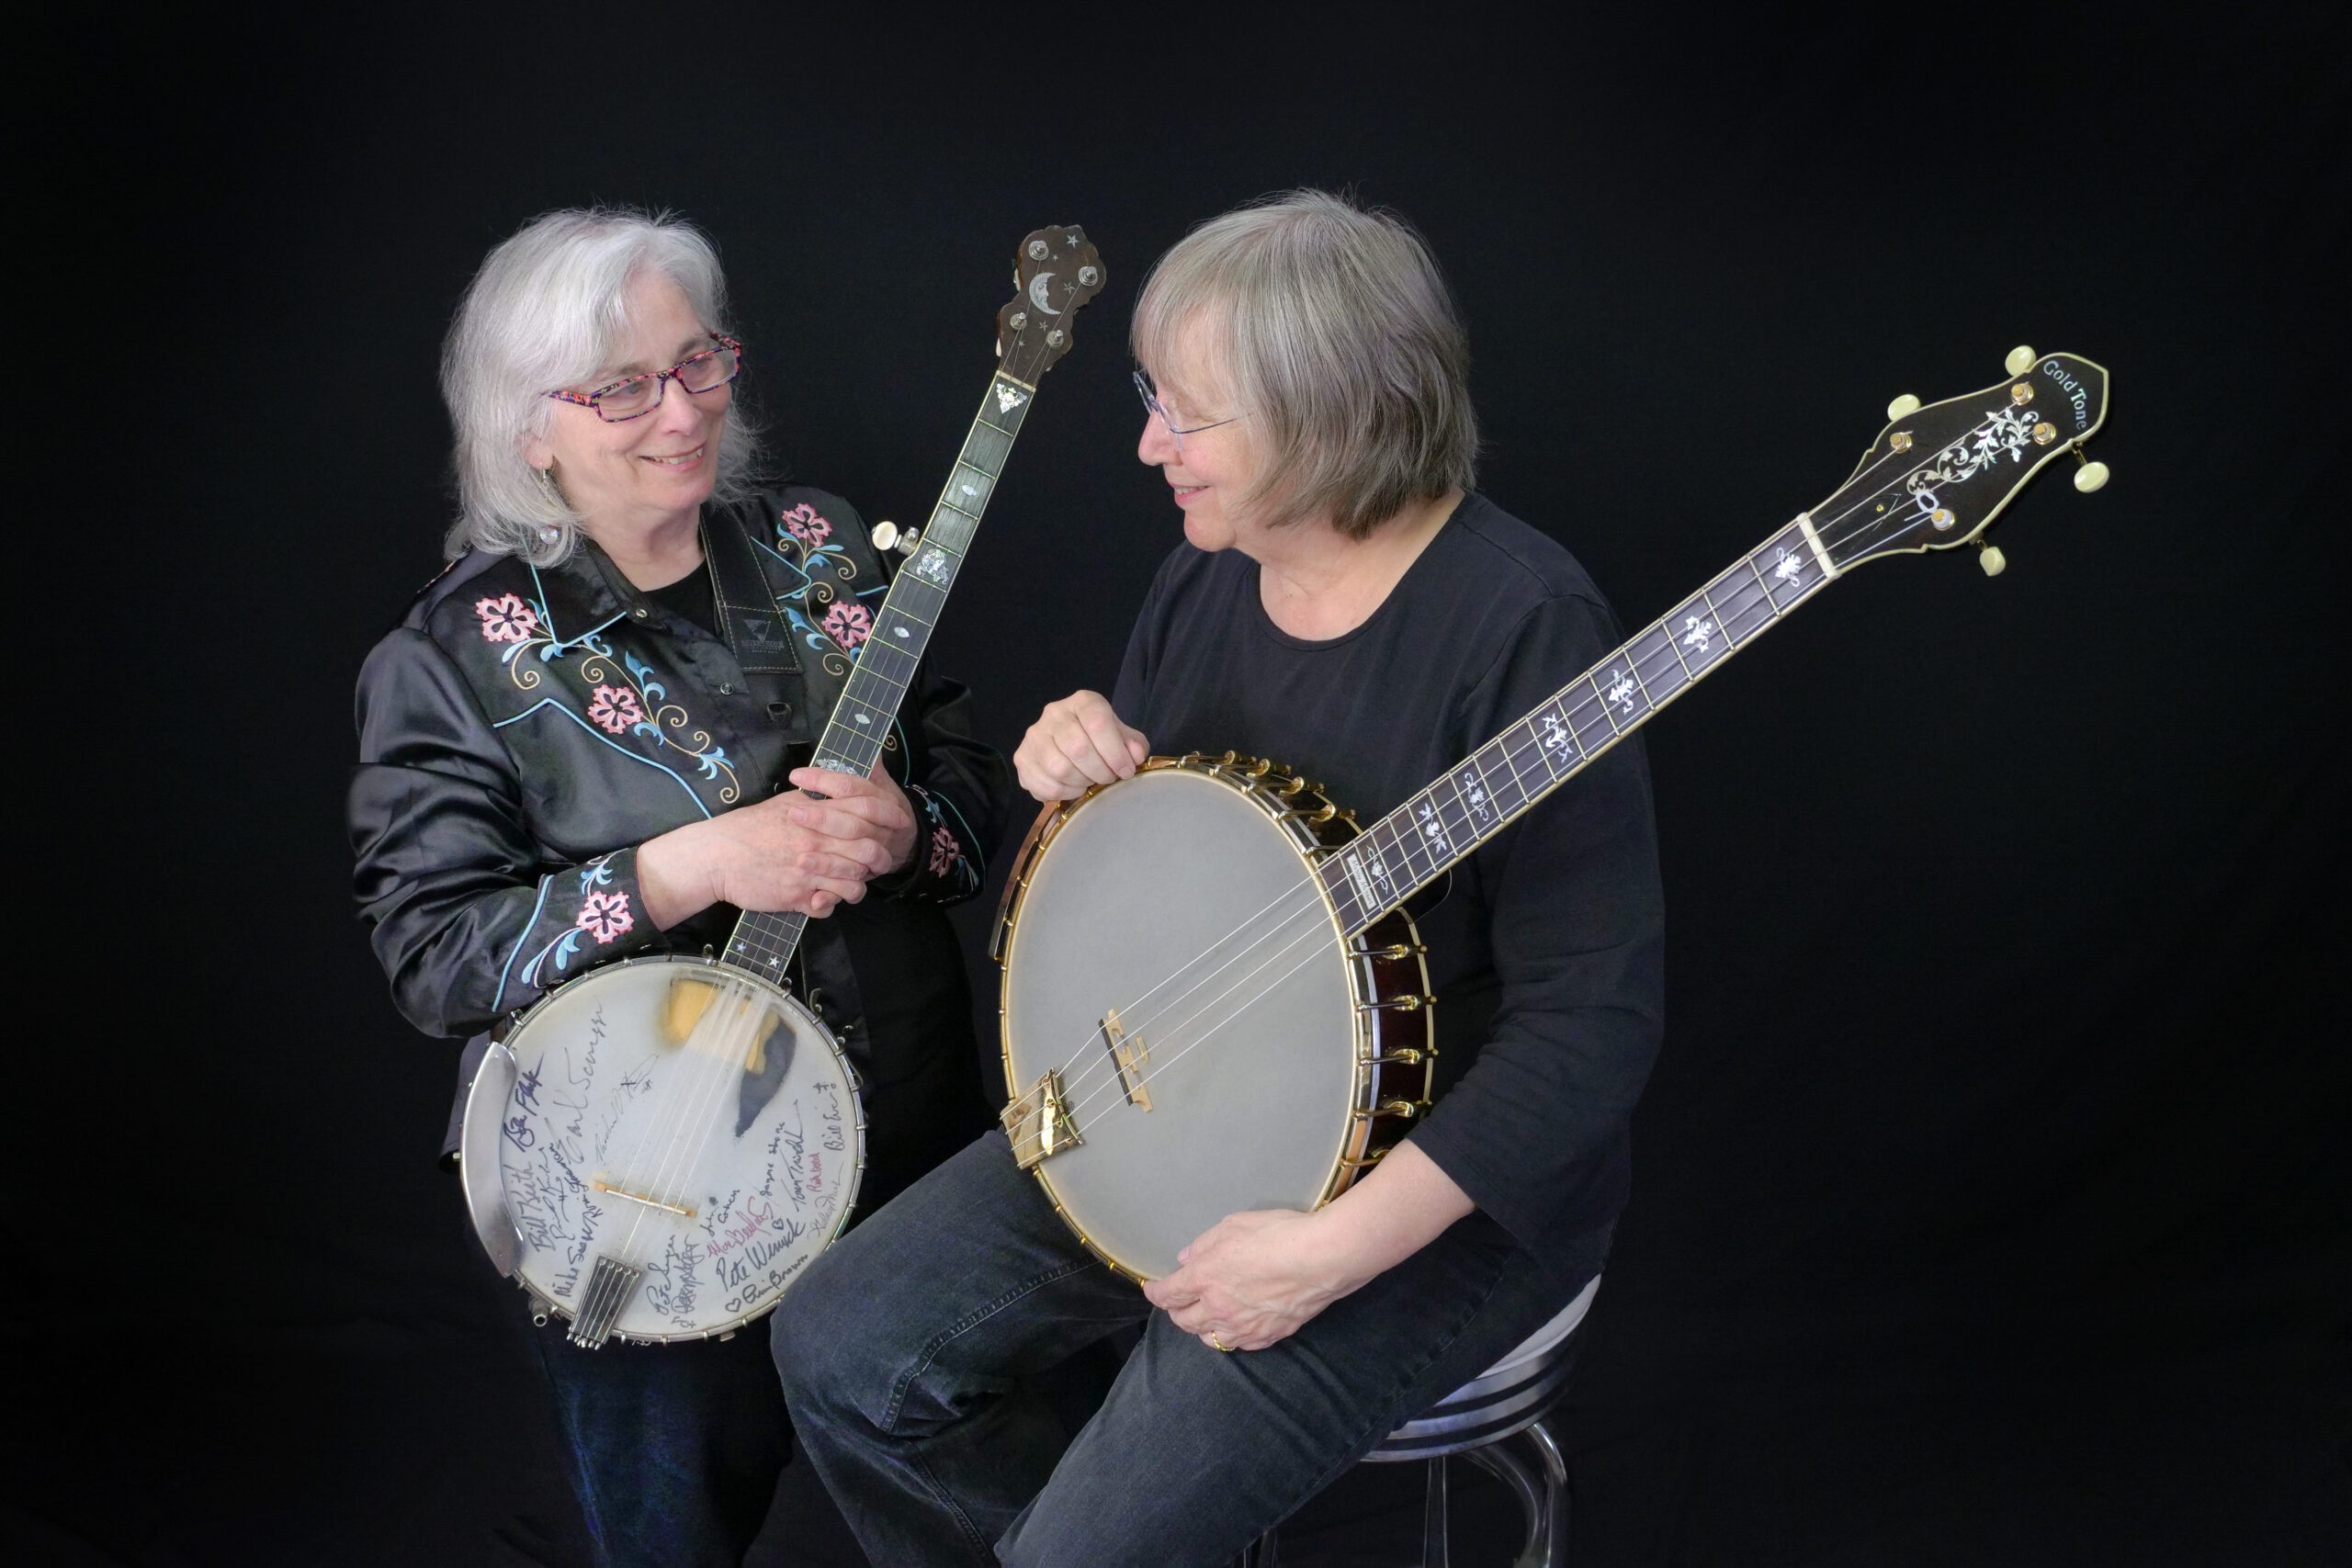 A photo of Cathy Fink and Marcy Marxer, each holding banjos.